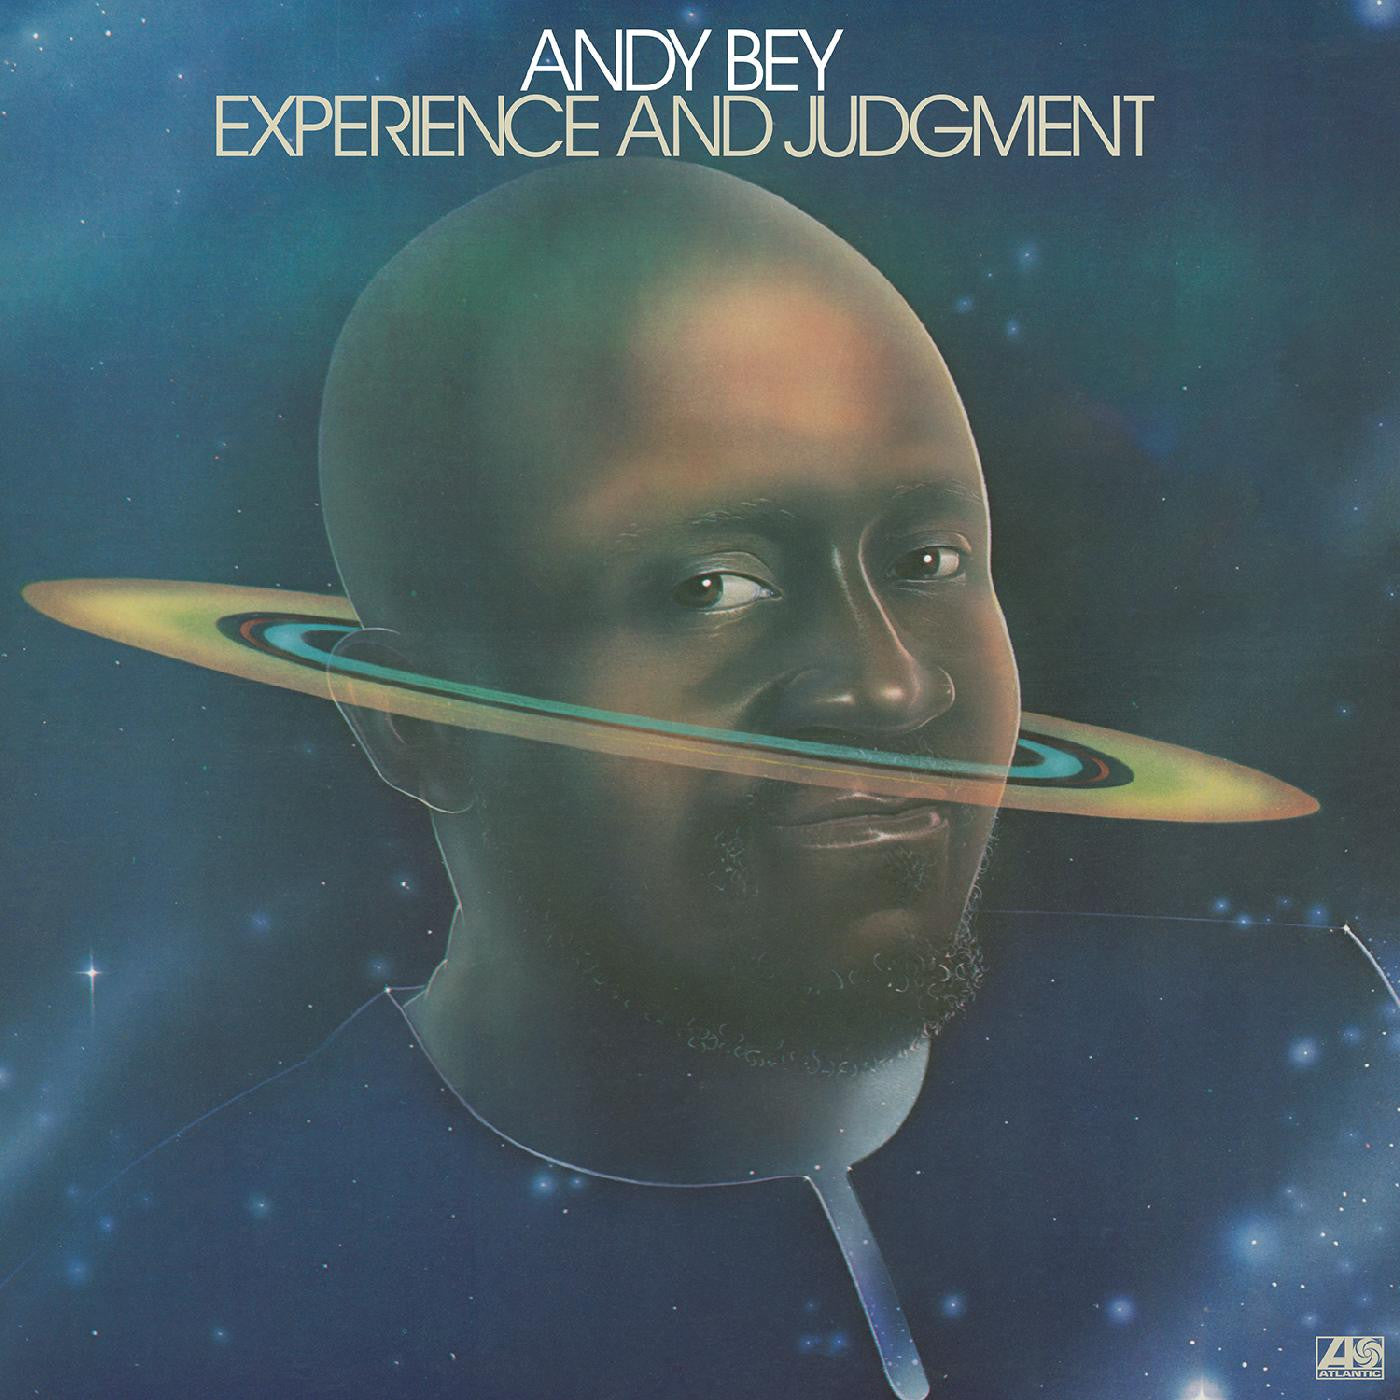 Andy Bey - Experience and Judgement (Vinyl LP)